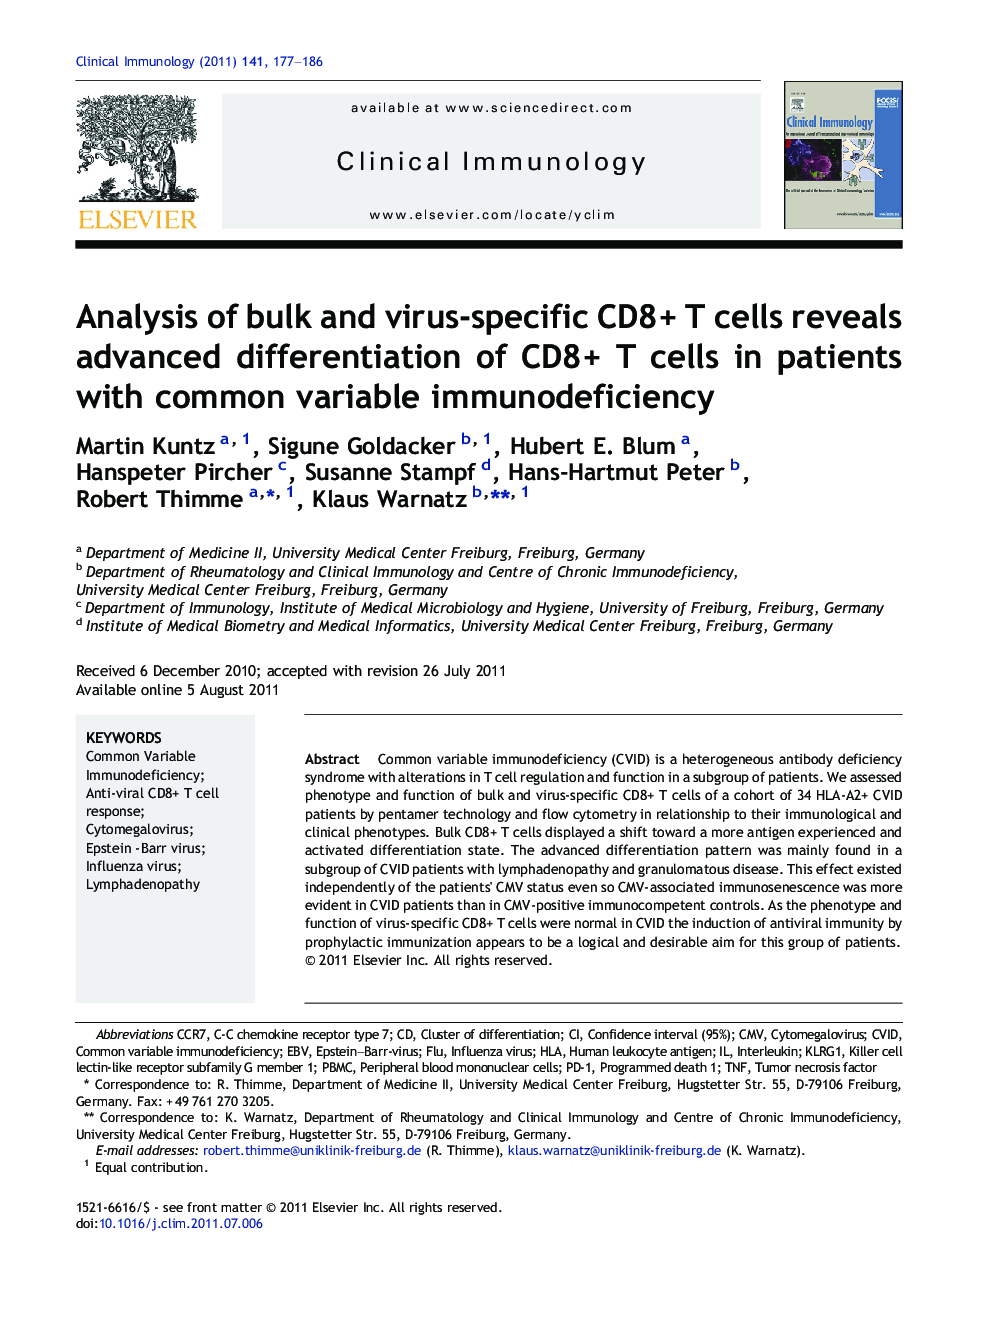 Analysis of bulk and virus-specific CD8+ T cells reveals advanced differentiation of CD8+ T cells in patients with common variable immunodeficiency